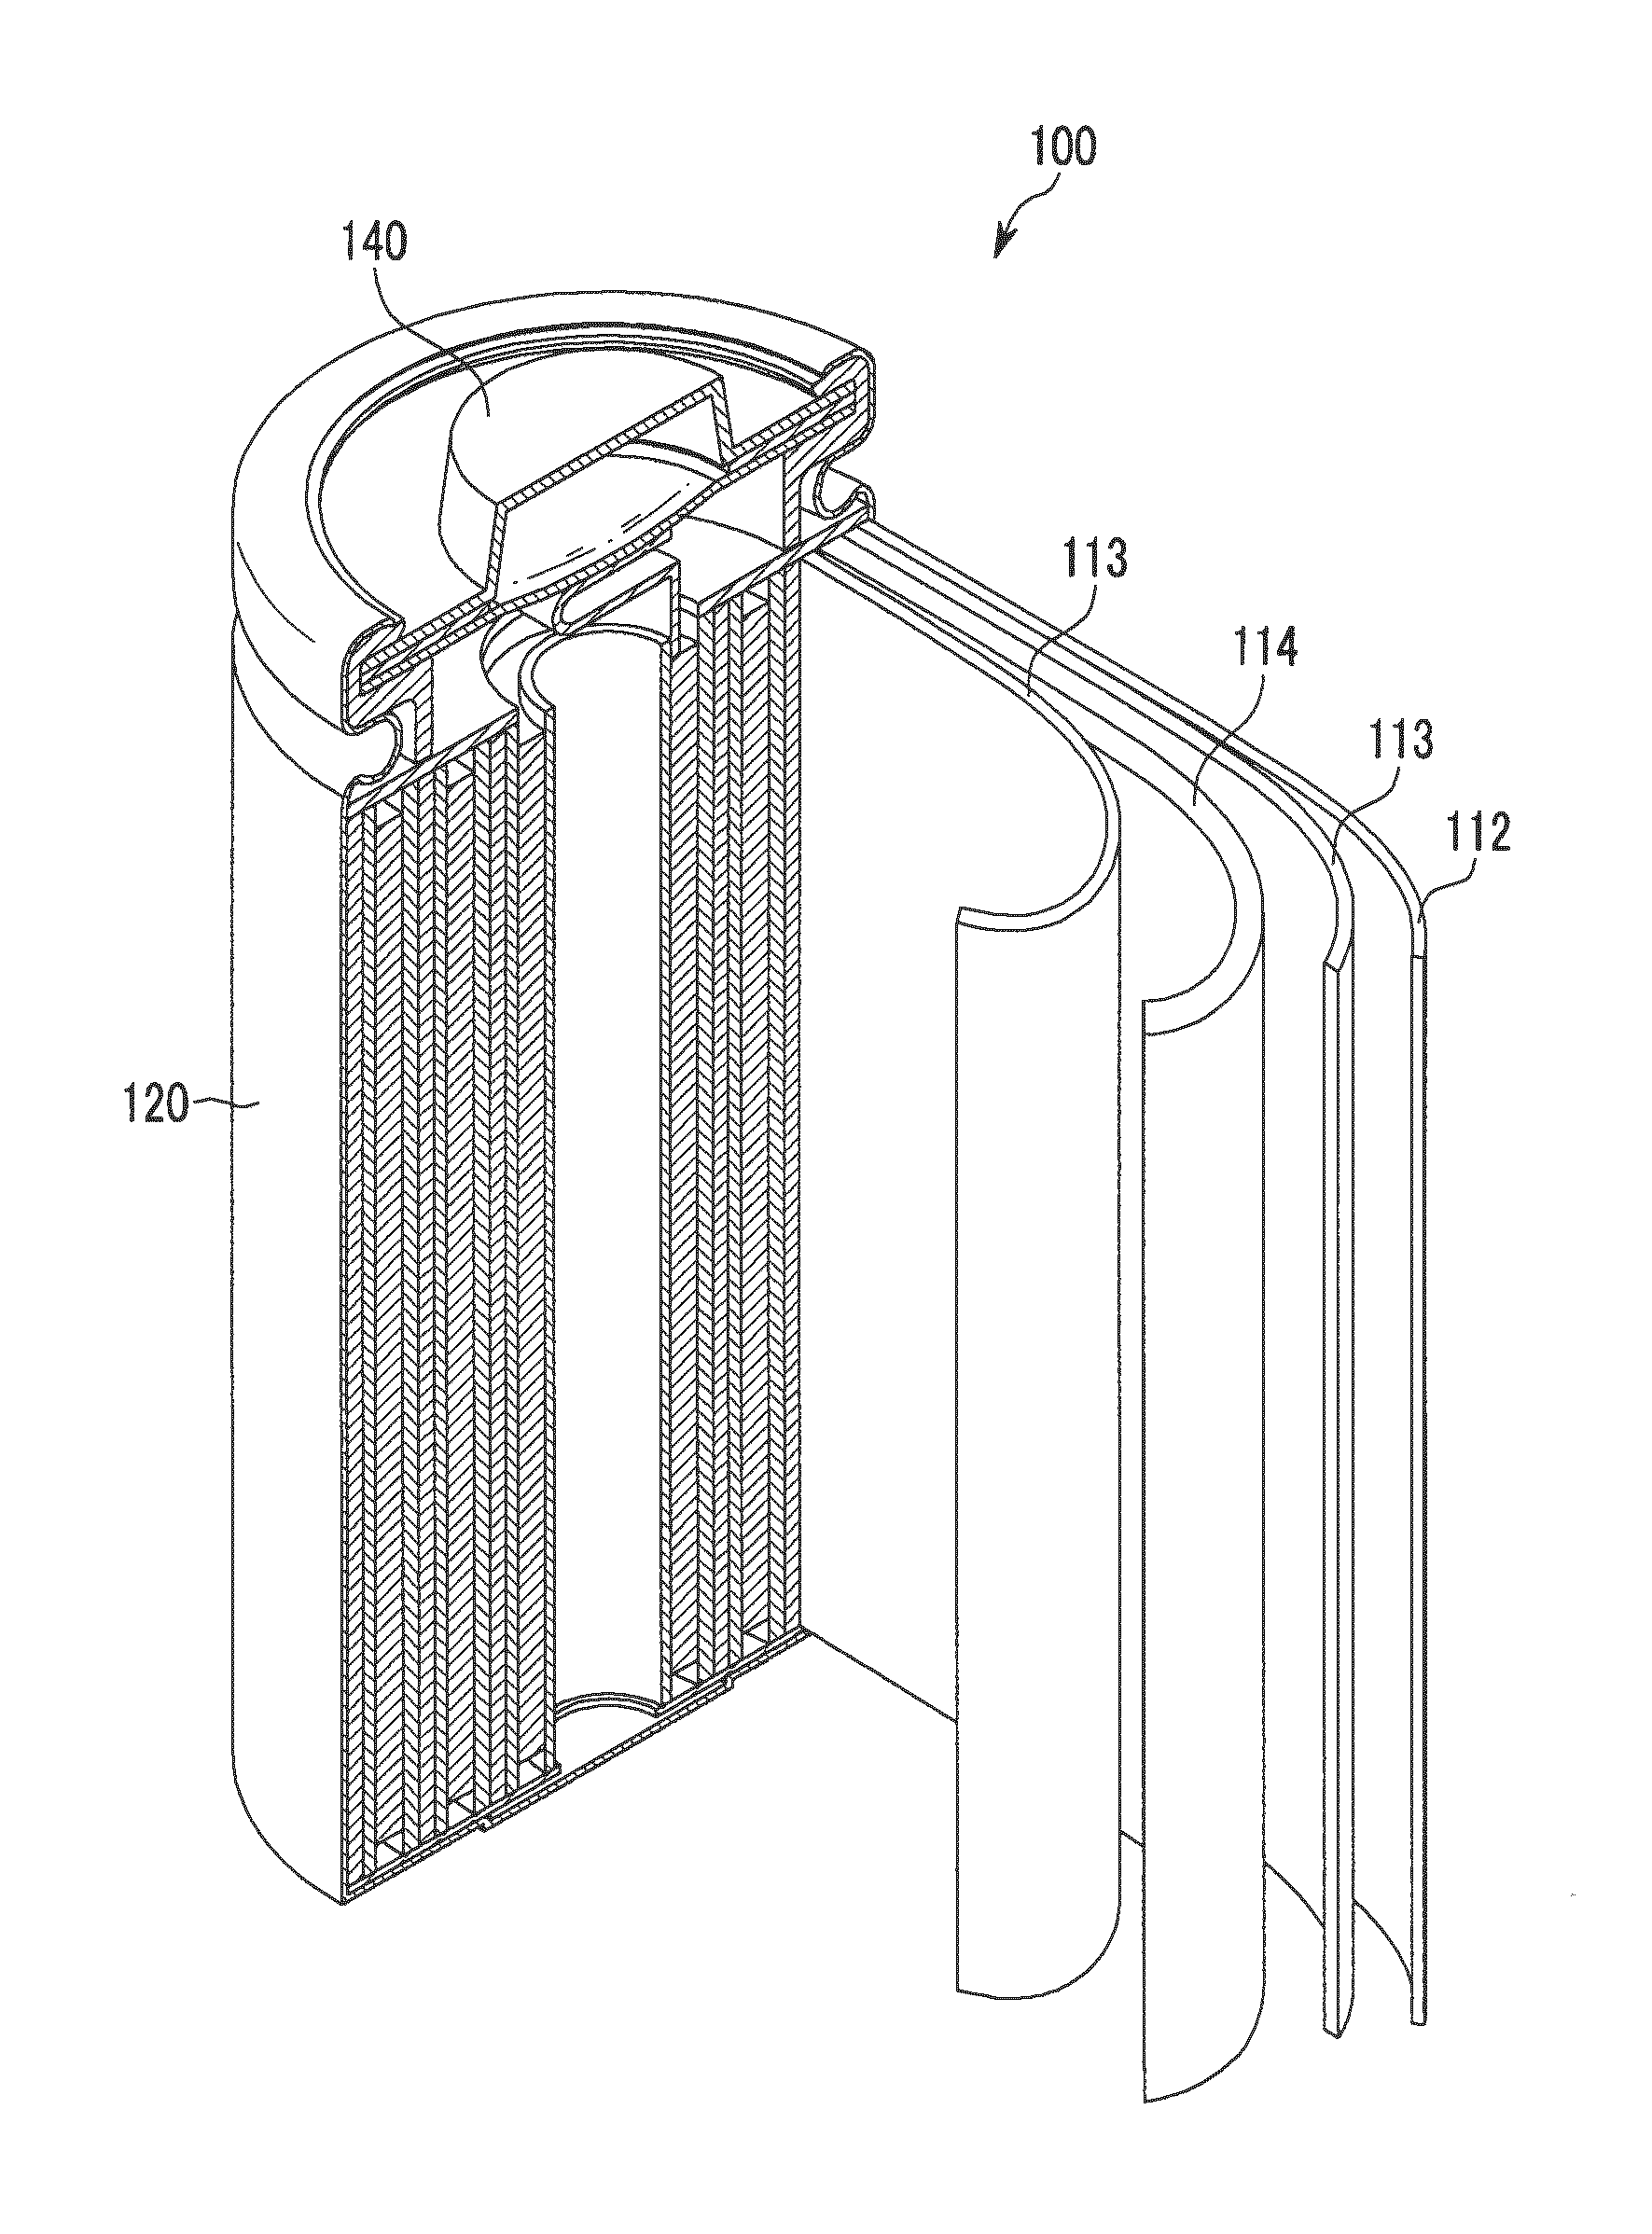 Positive electrode for rechargeable lithium battery, method for manufacturing the same, and rechargeable lithium battery including the same